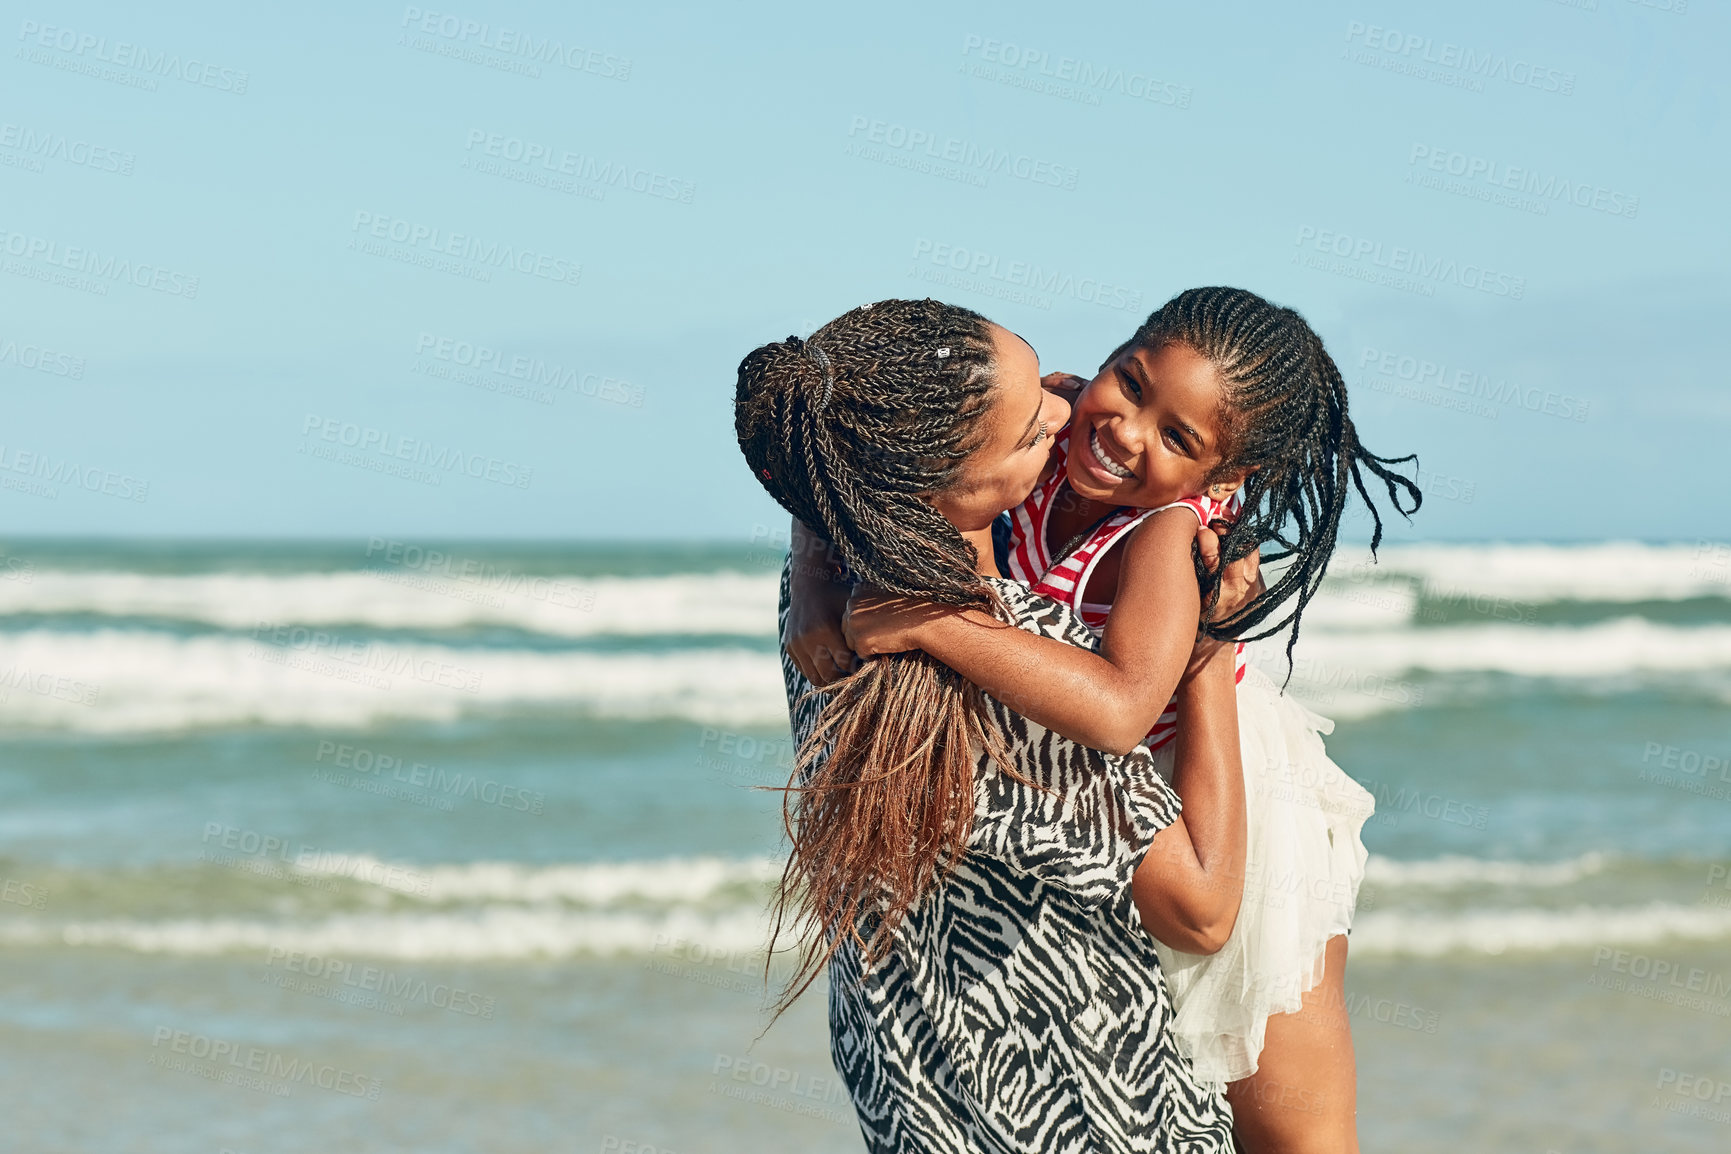 Buy stock photo Shot of a mother and her little daughter enjoying some quality time together at the beach